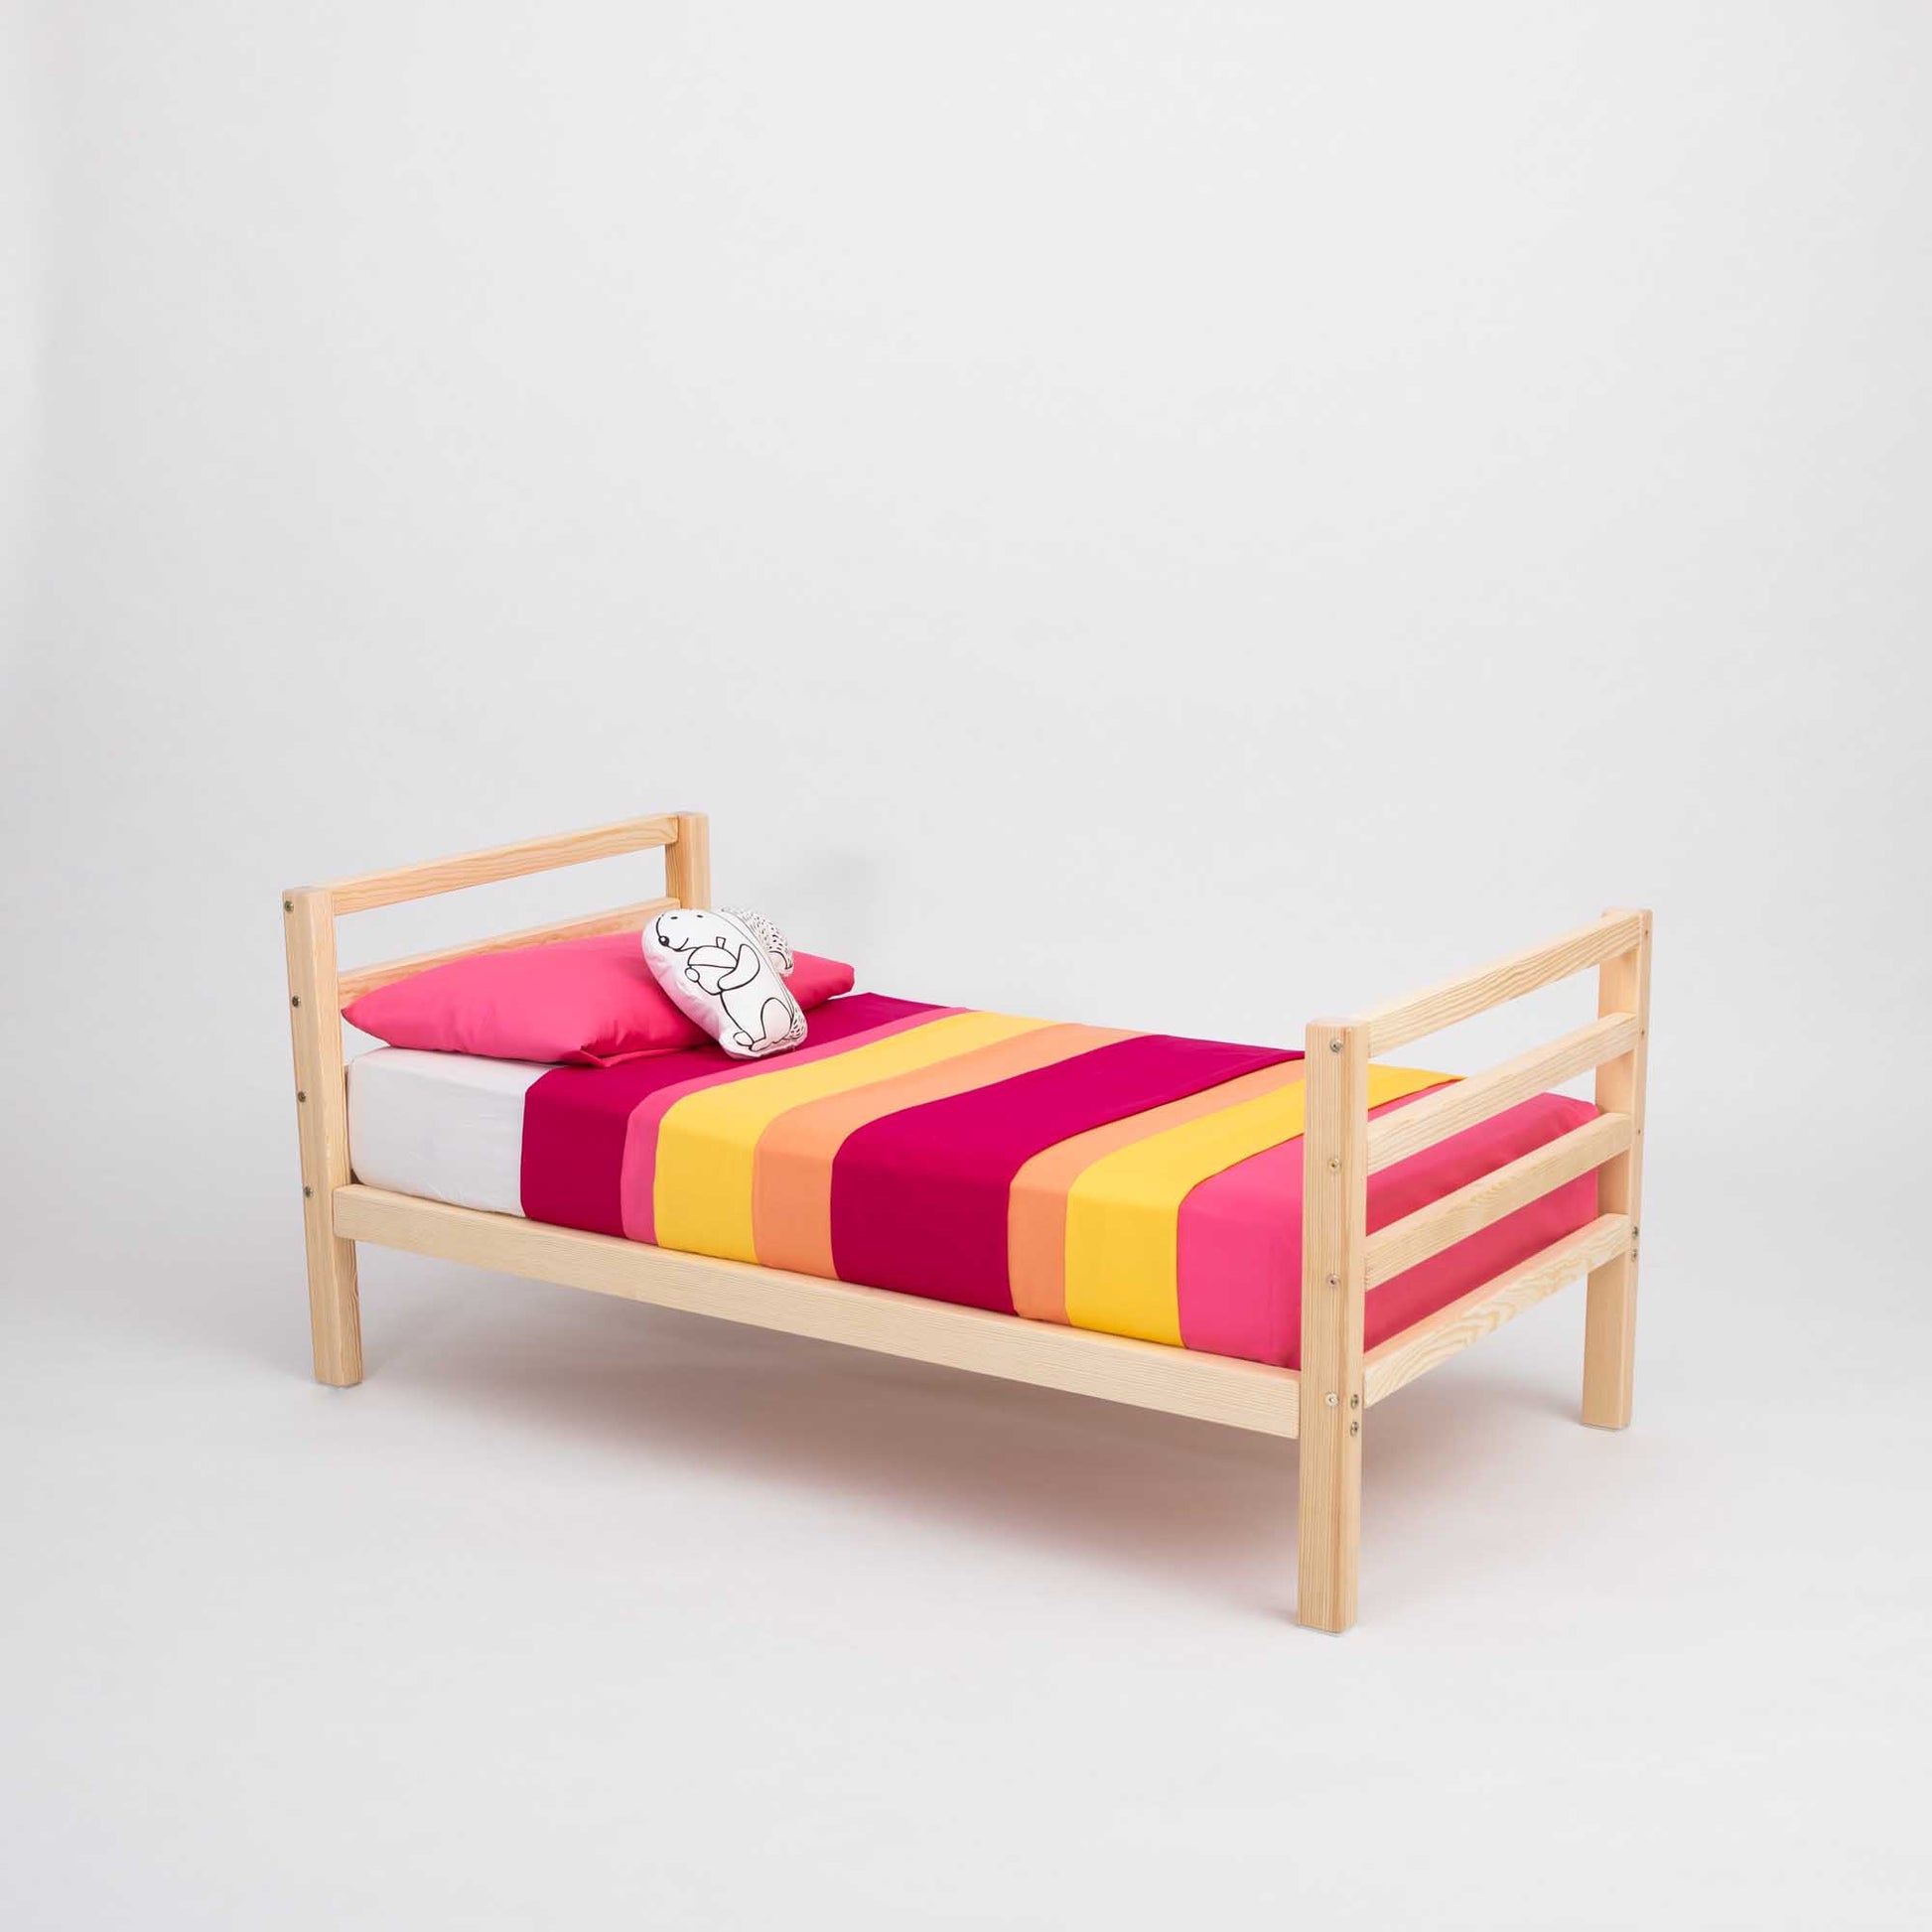 A Sweet Home From Wood kids' bed on legs with a horizontal rail headboard and footboard, with a pink and yellow striped blanket.